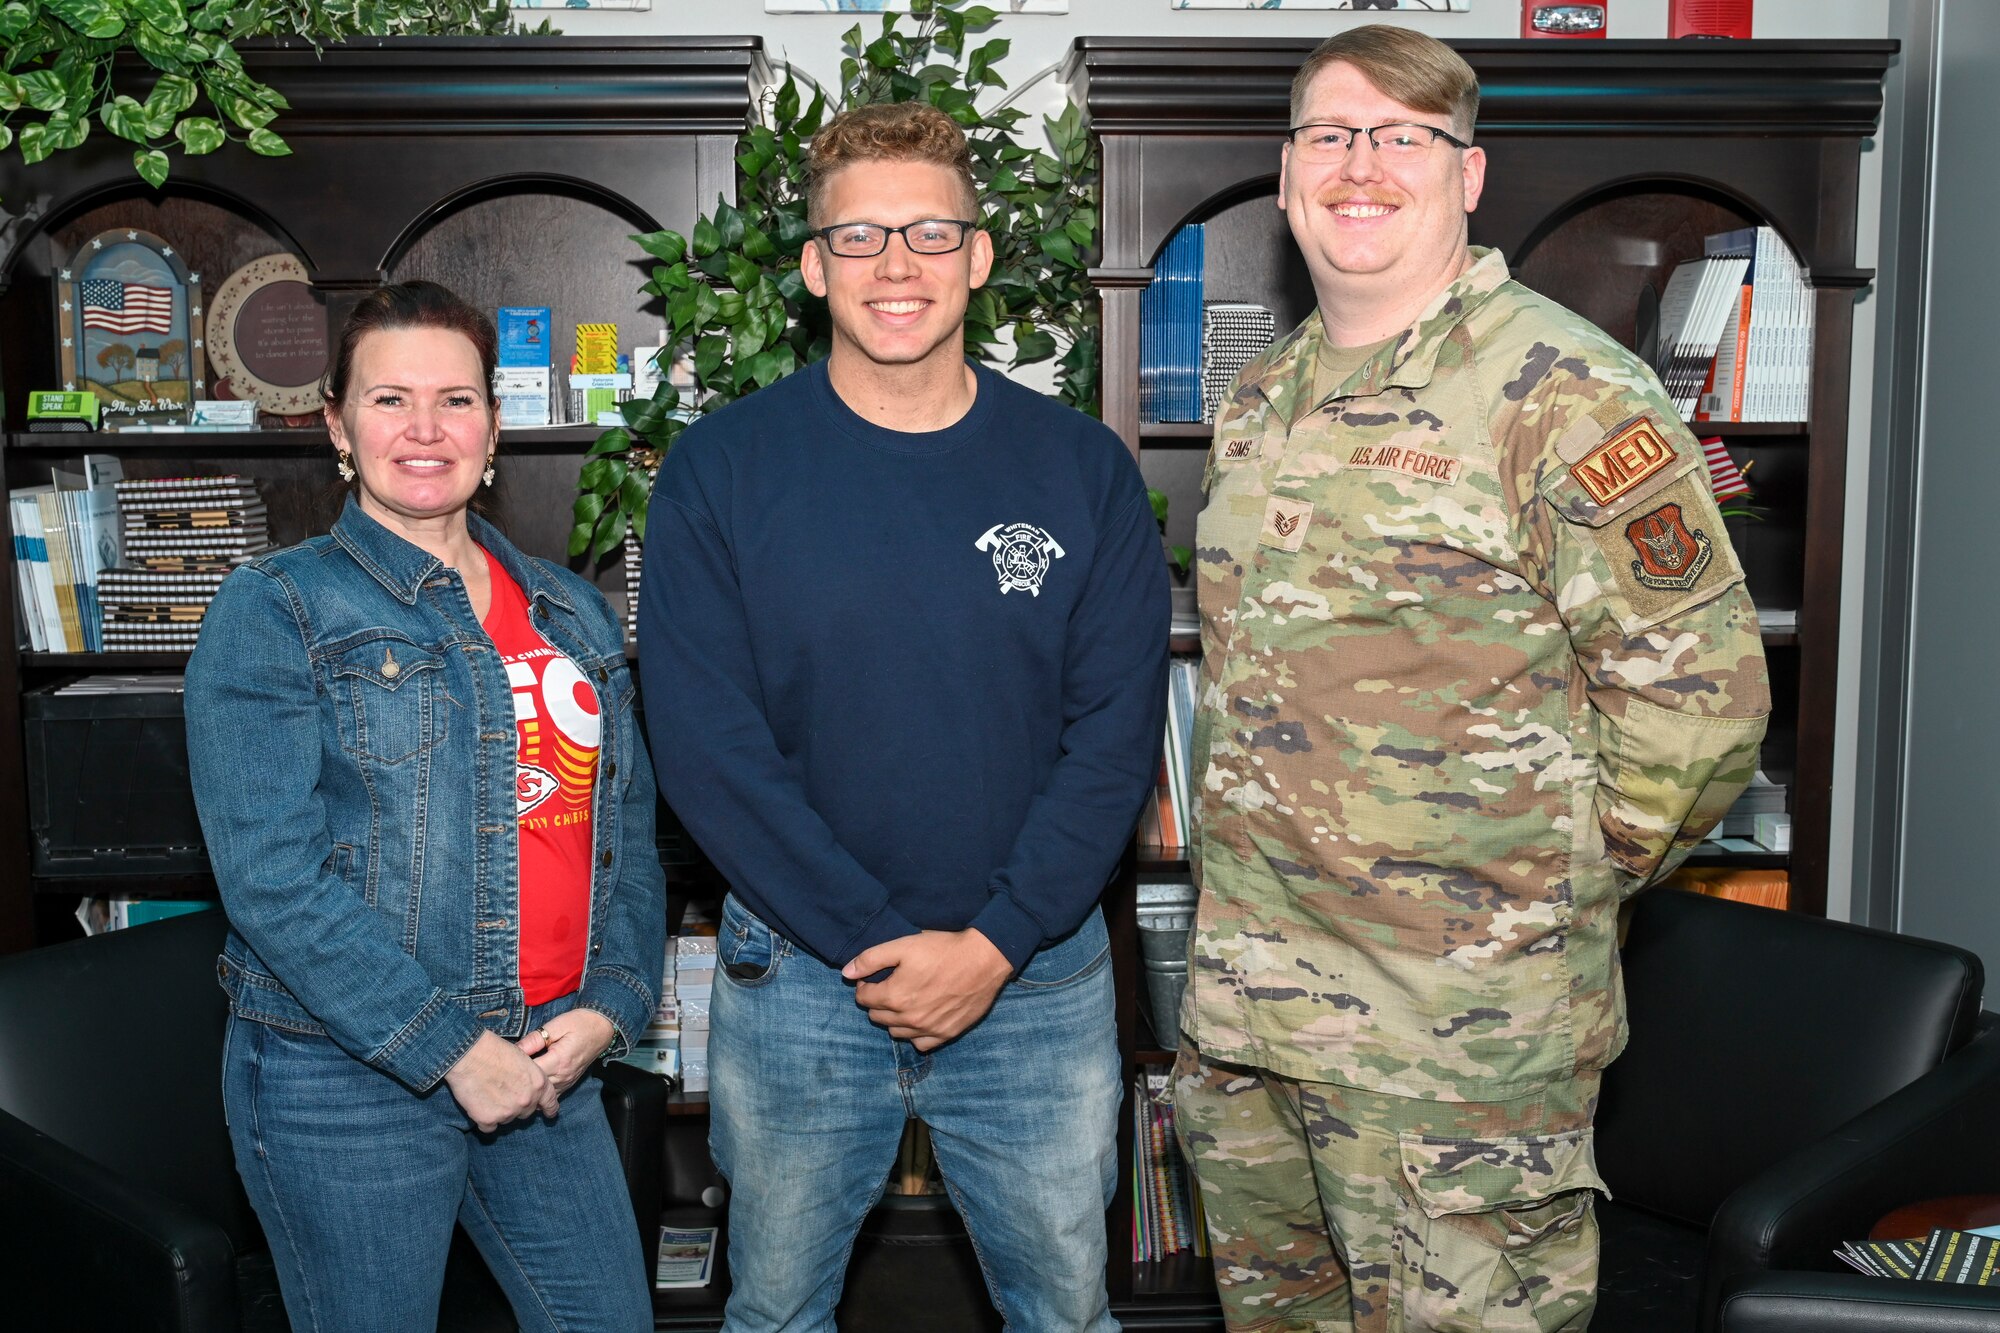 From left to right, a woman in a denim jacket and jeans, a man in jeans and a blue sweatshirt, and a man in camouflage fatigues smile at the camera in front of a pair of bookshelves.